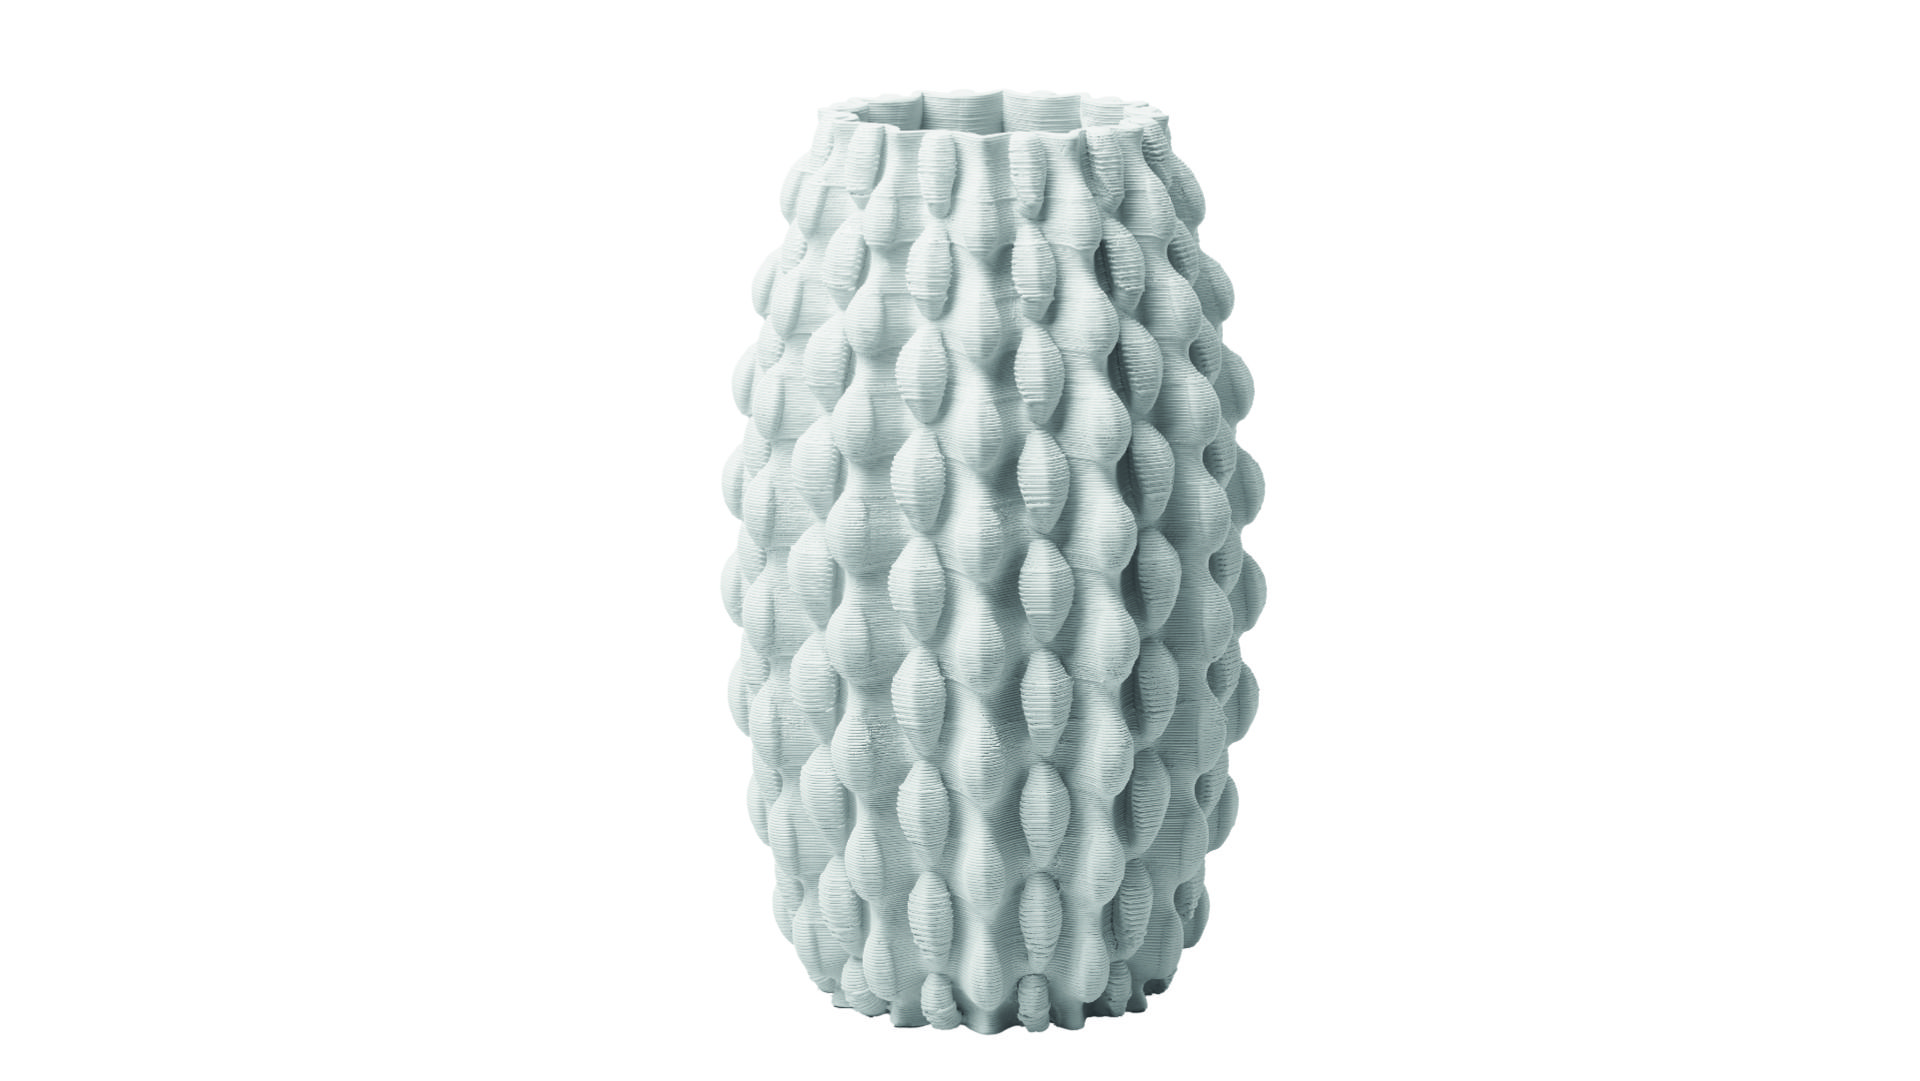 3D print vase from Chic mic